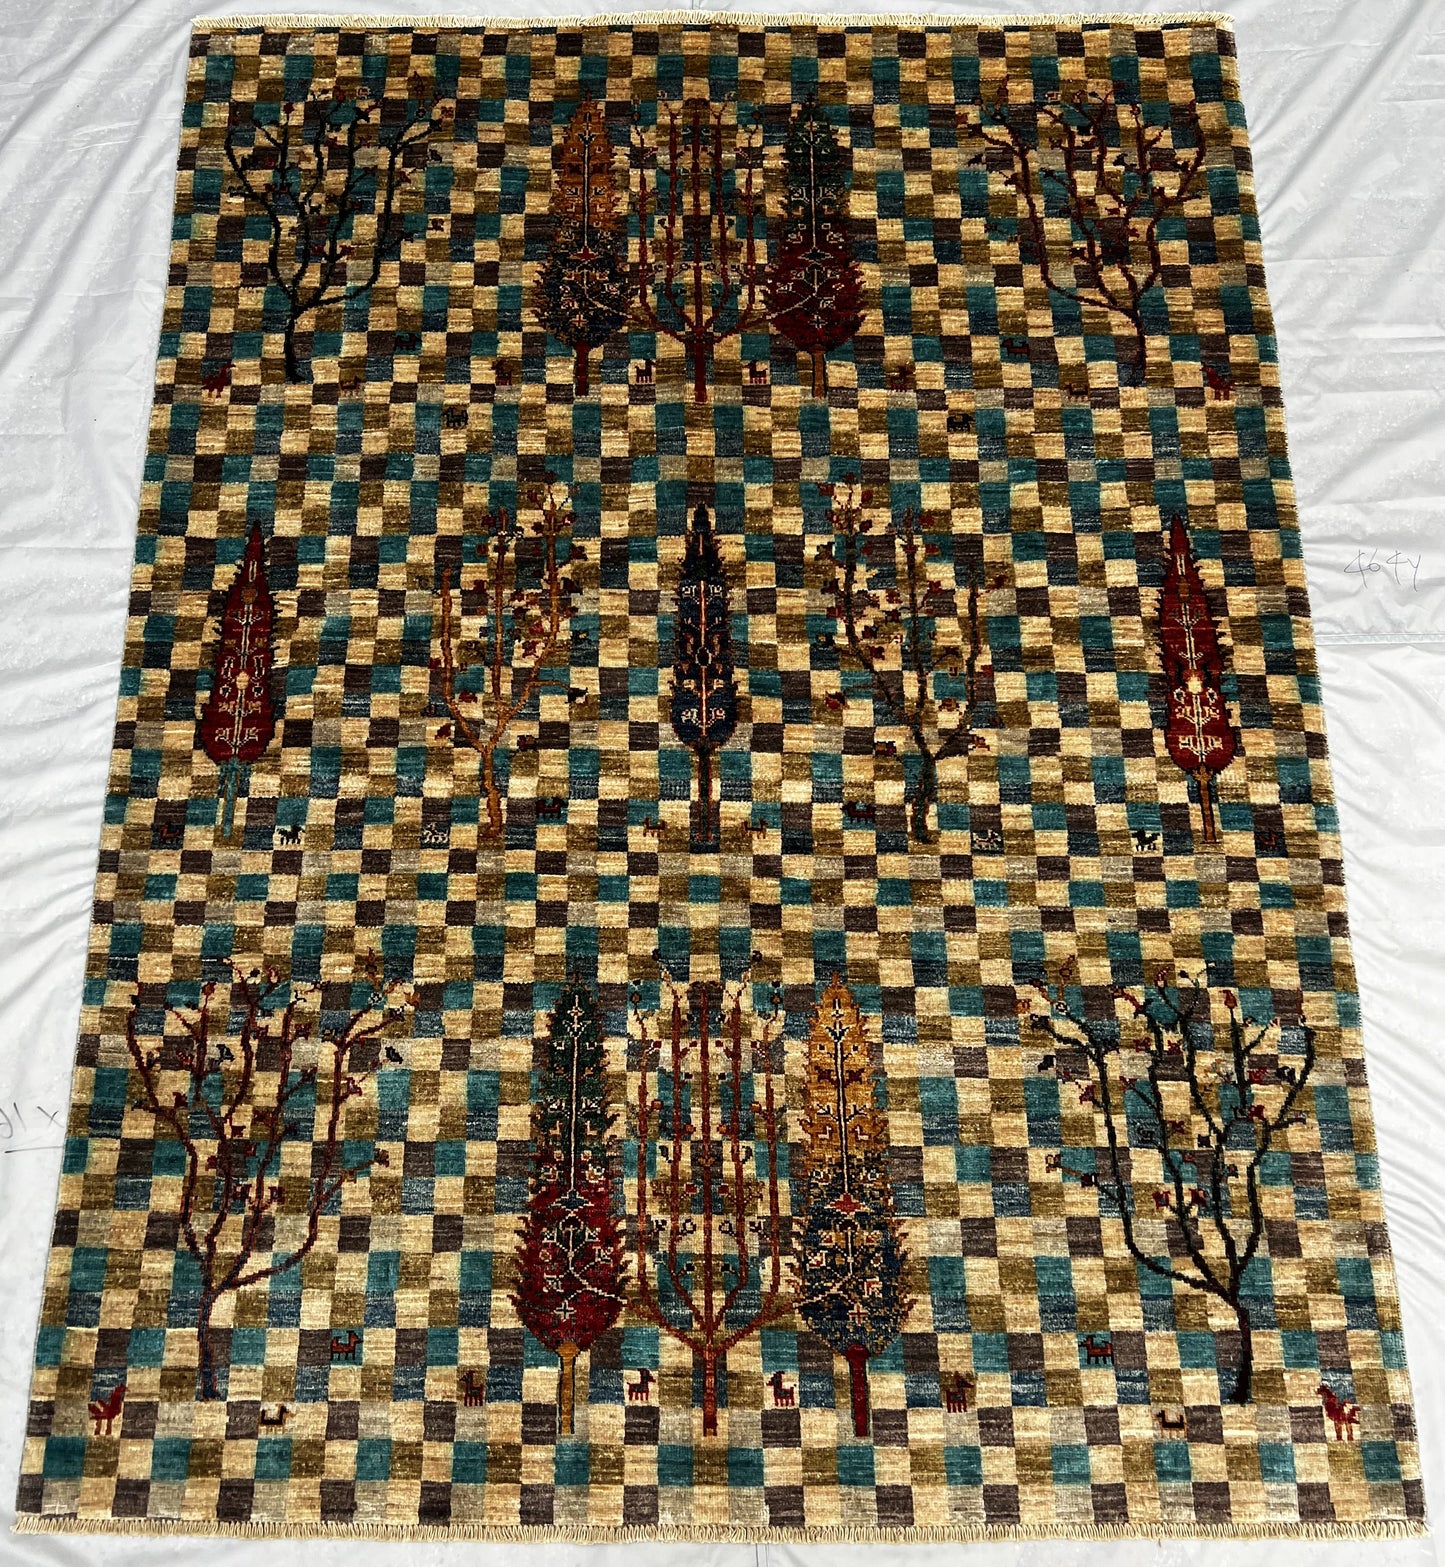 Afghan Hand Knotted/ Knitted Living Room/Dining Room Chob Rang(Shawl Design) Area Rug 6.4ftx4.8ft (CH-M-6X4-11-N) (Kabul) - Kabul Rugs